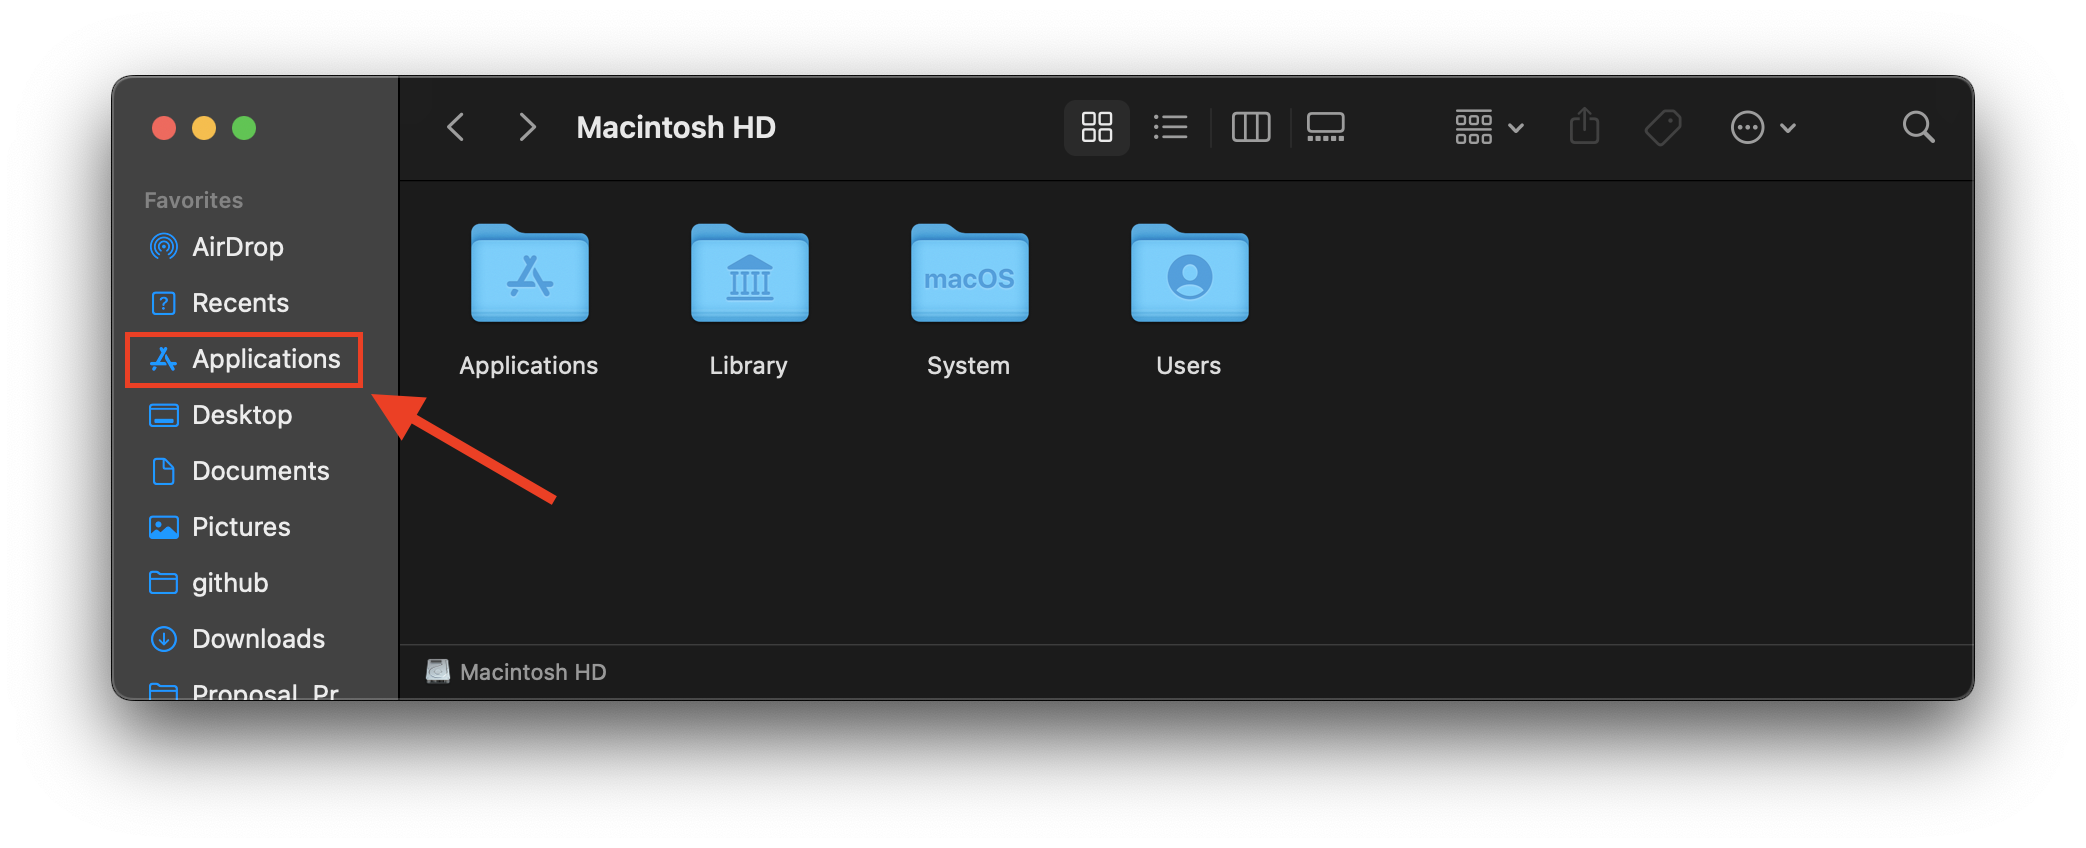 Finder window with 'Applications' highlighted under 'Favorites'